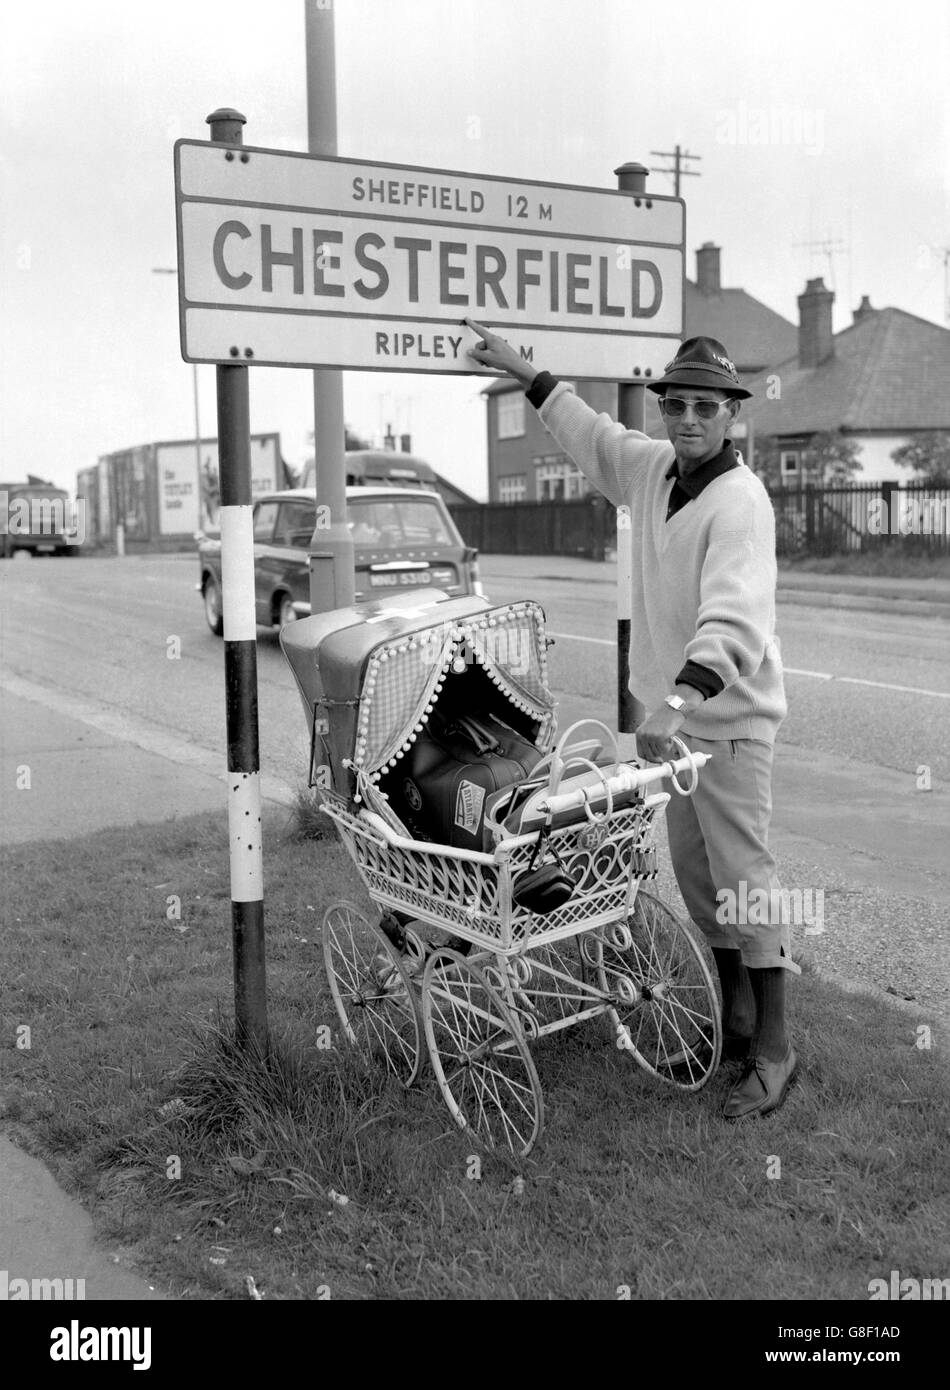 West Germany fan Emil Holliger arrives in Chesterfield, just twelve miles  from his destination, Sheffield, after walking all the way from Zurich,  Switzerland, for the Group Two match between West Germany and